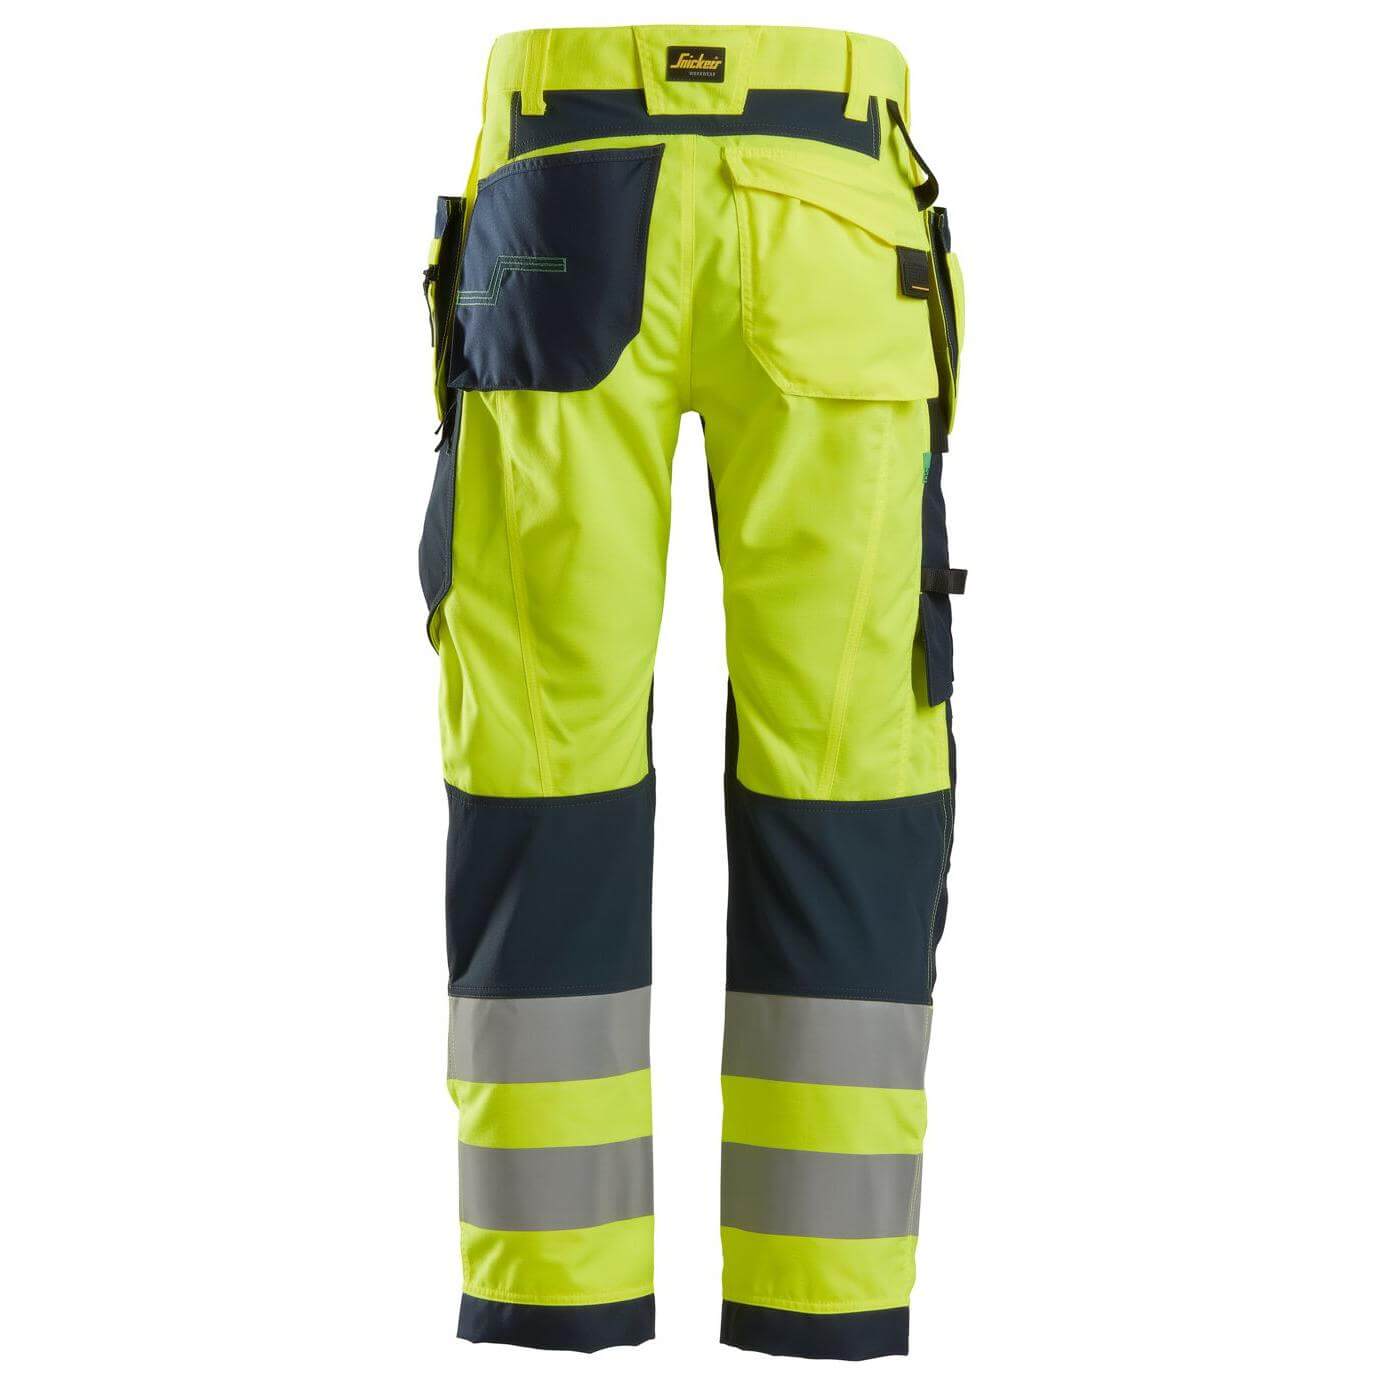 Snickers 6932 Lightweight Hi Vis Work Trousers with Holster Pockets Class 2 Hi Vis Yellow Navy Blue back #colour_hi-vis-yellow-navy-blue